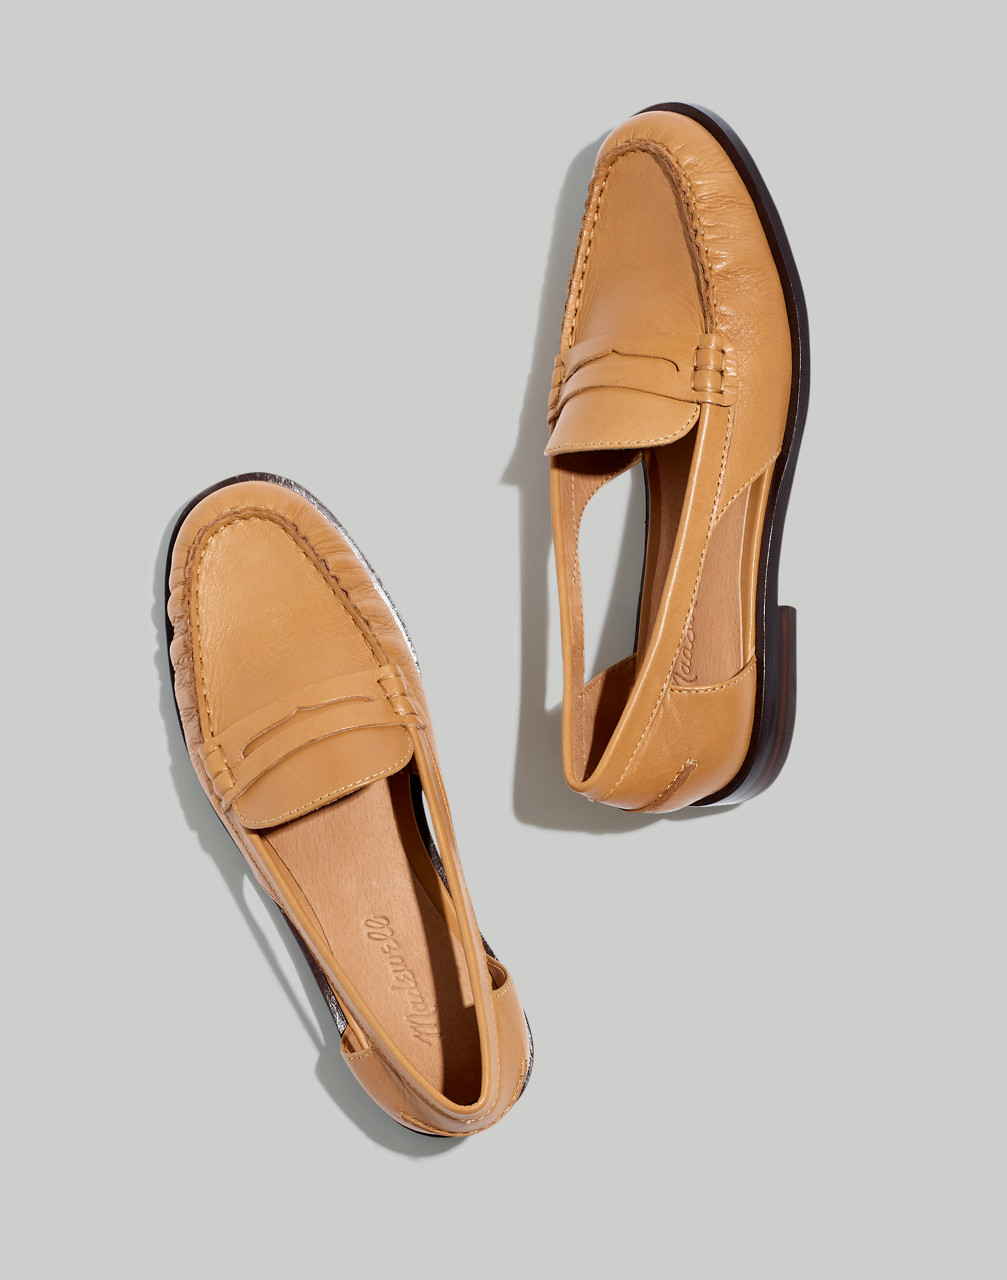 Mw The Nye Cutout Loafer In Desert Camel